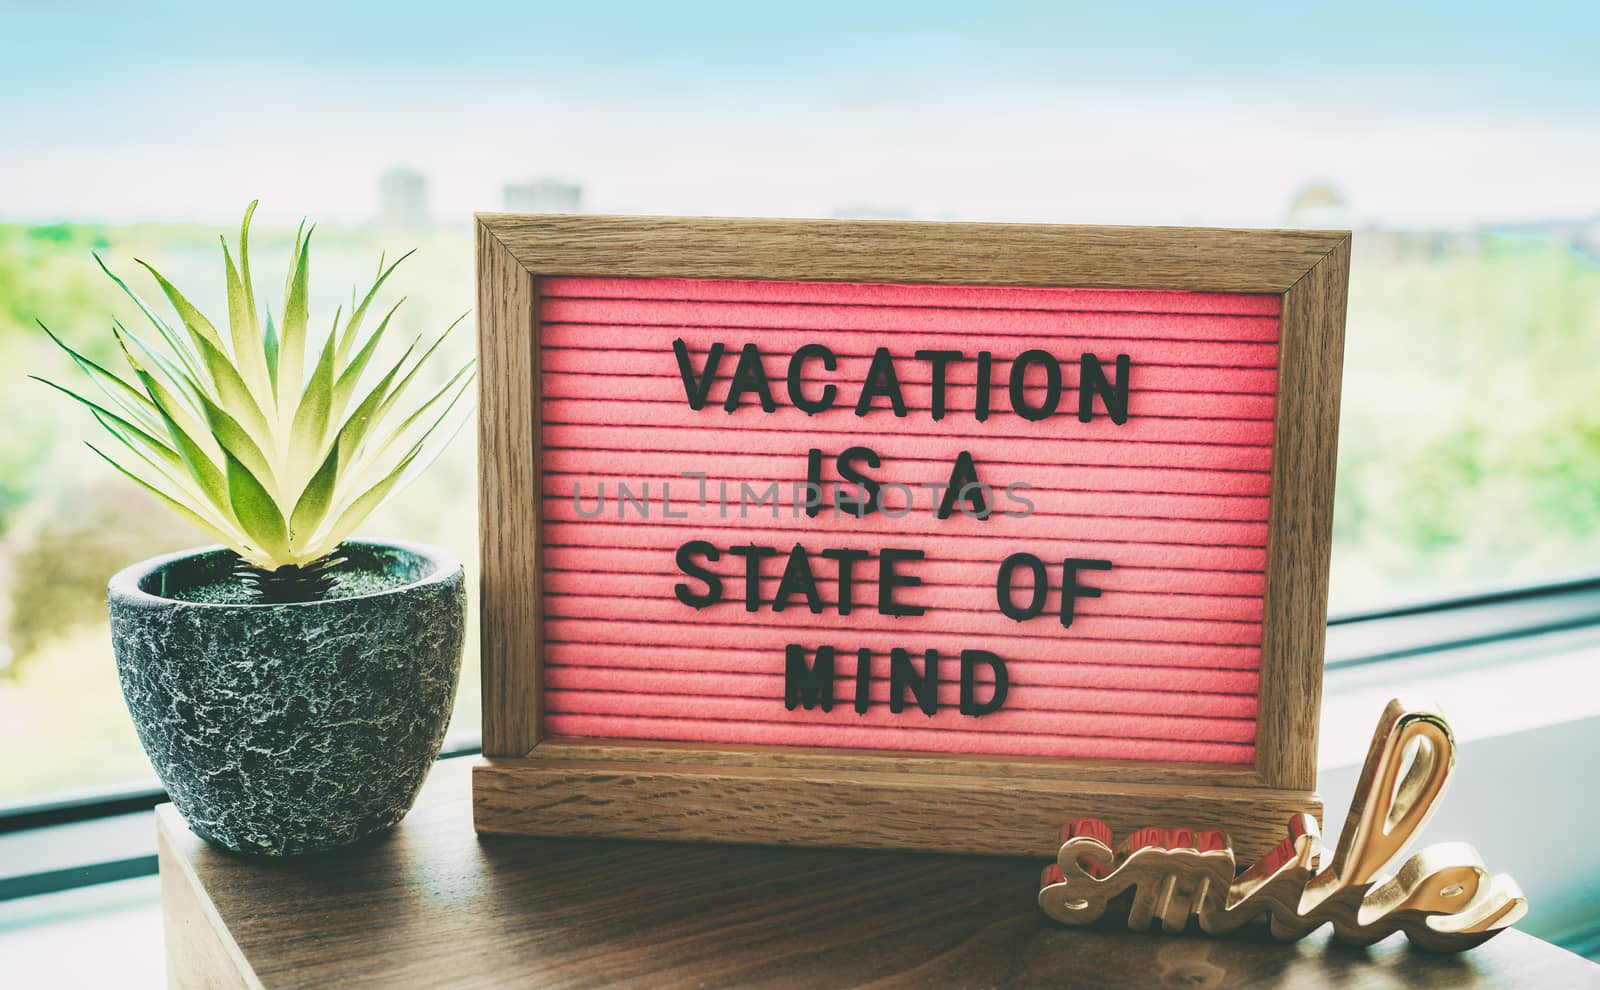 Vacation is a state of mind positive inspirational quote text on message board for summer holidays travel plans cancelled due to COVID-19 coronavirus. Staycation pink felt board text for staying home by Maridav